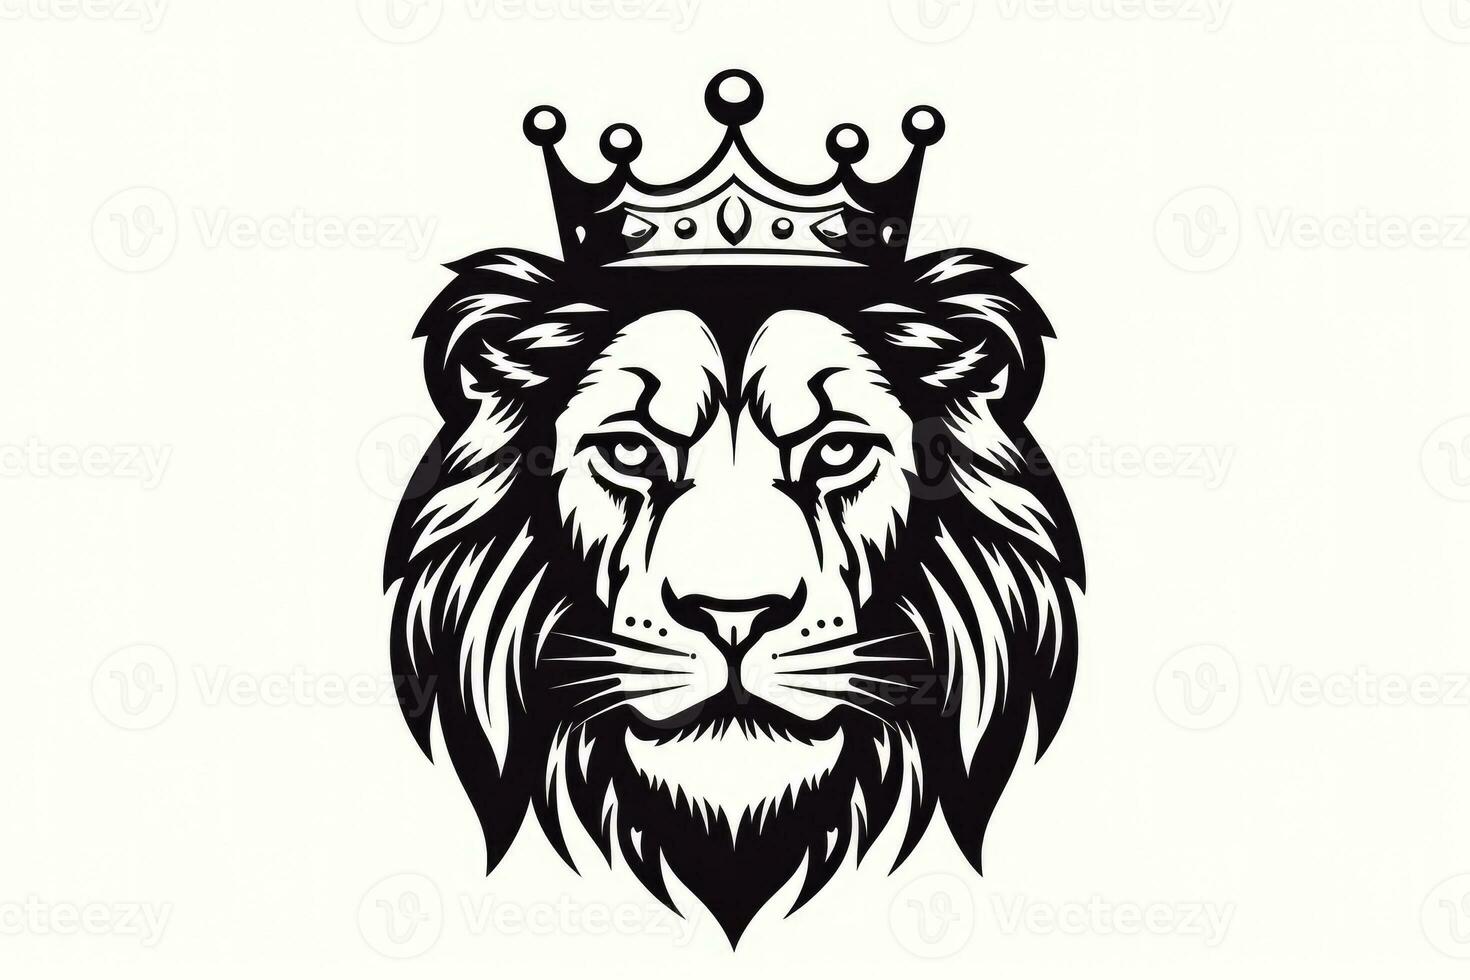 En face portrait of a standing African lion with a big mane in a black and white vector design photo